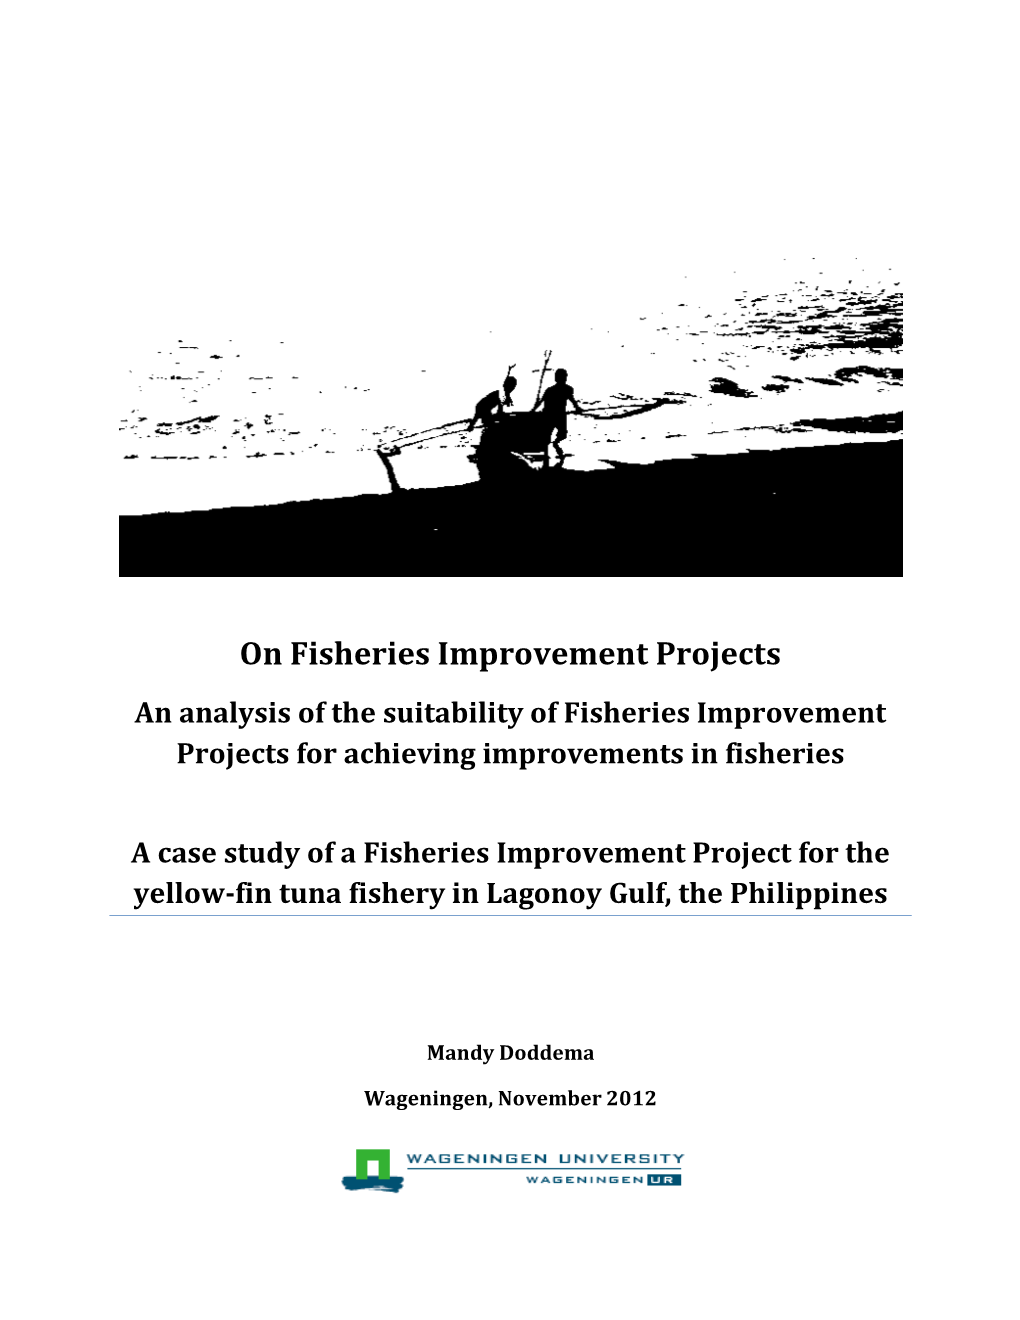 On Fisheries Improvement Projects an Analysis of the Suitability of Fisheries Improvement Projects for Achieving Improvements in Fisheries